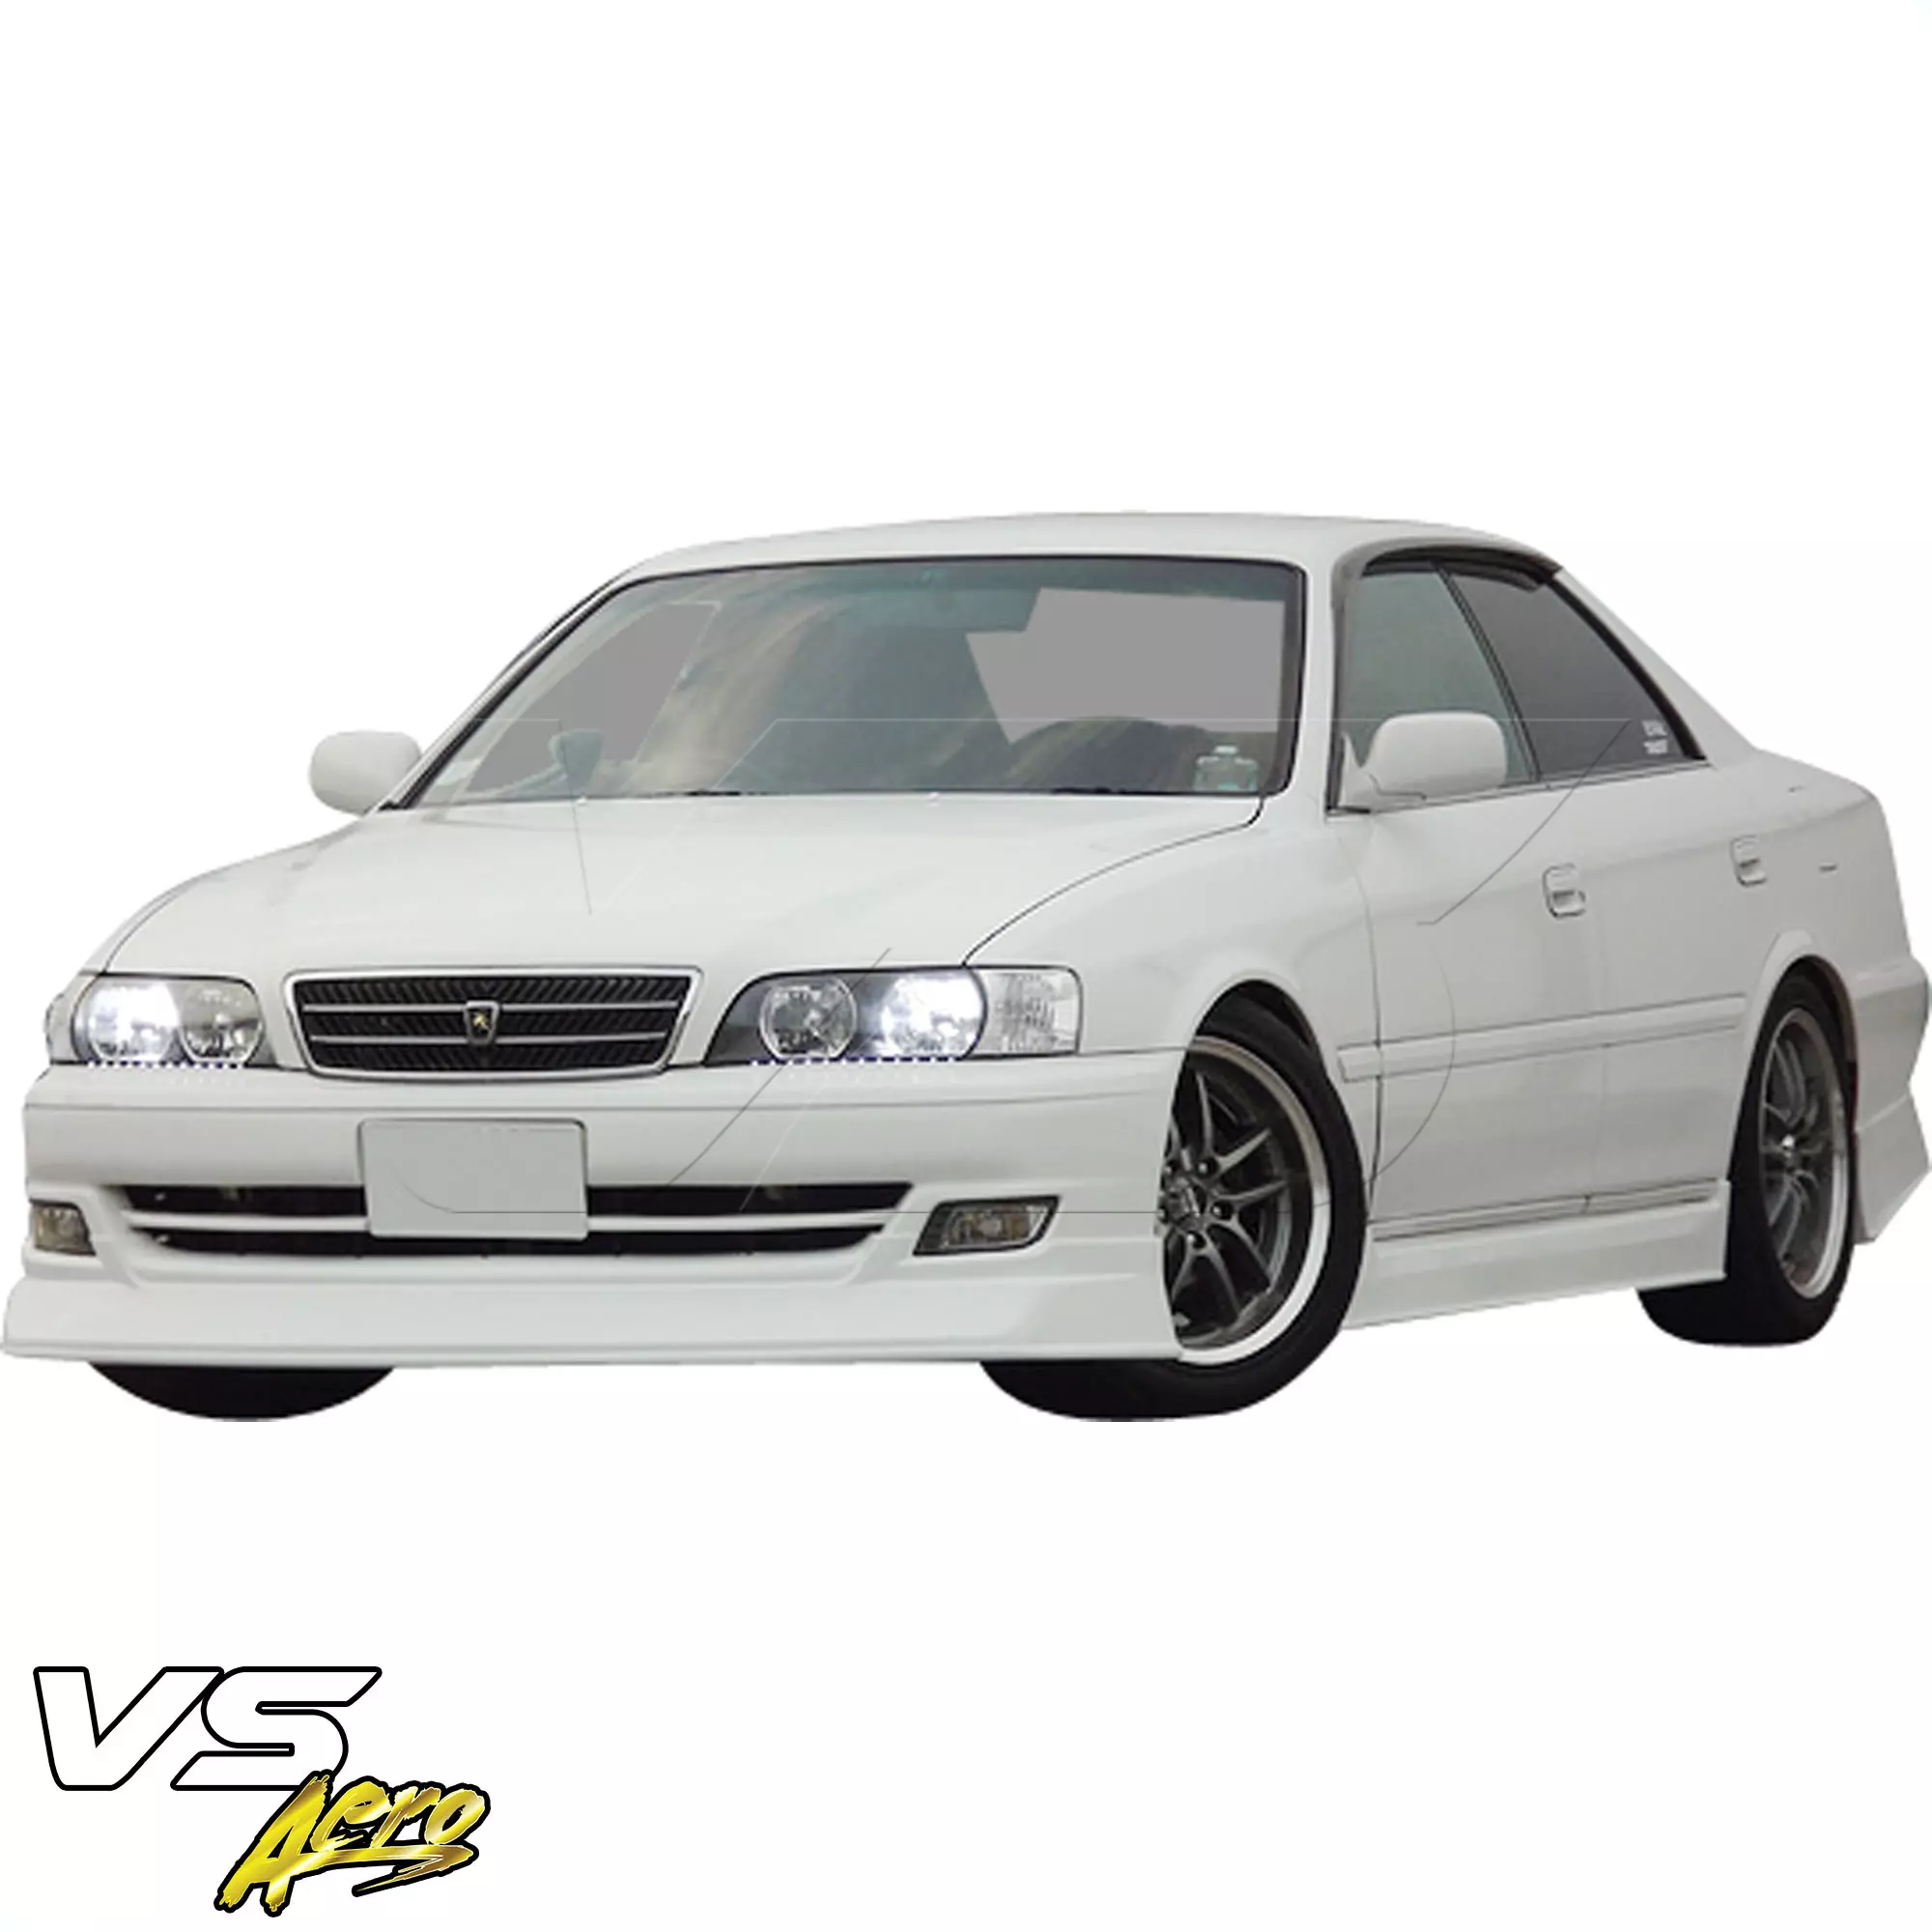 VSaero FRP TRAU Late Front Lip Valance > Toyota Chaser JZX100 1999-2000 - Image 2